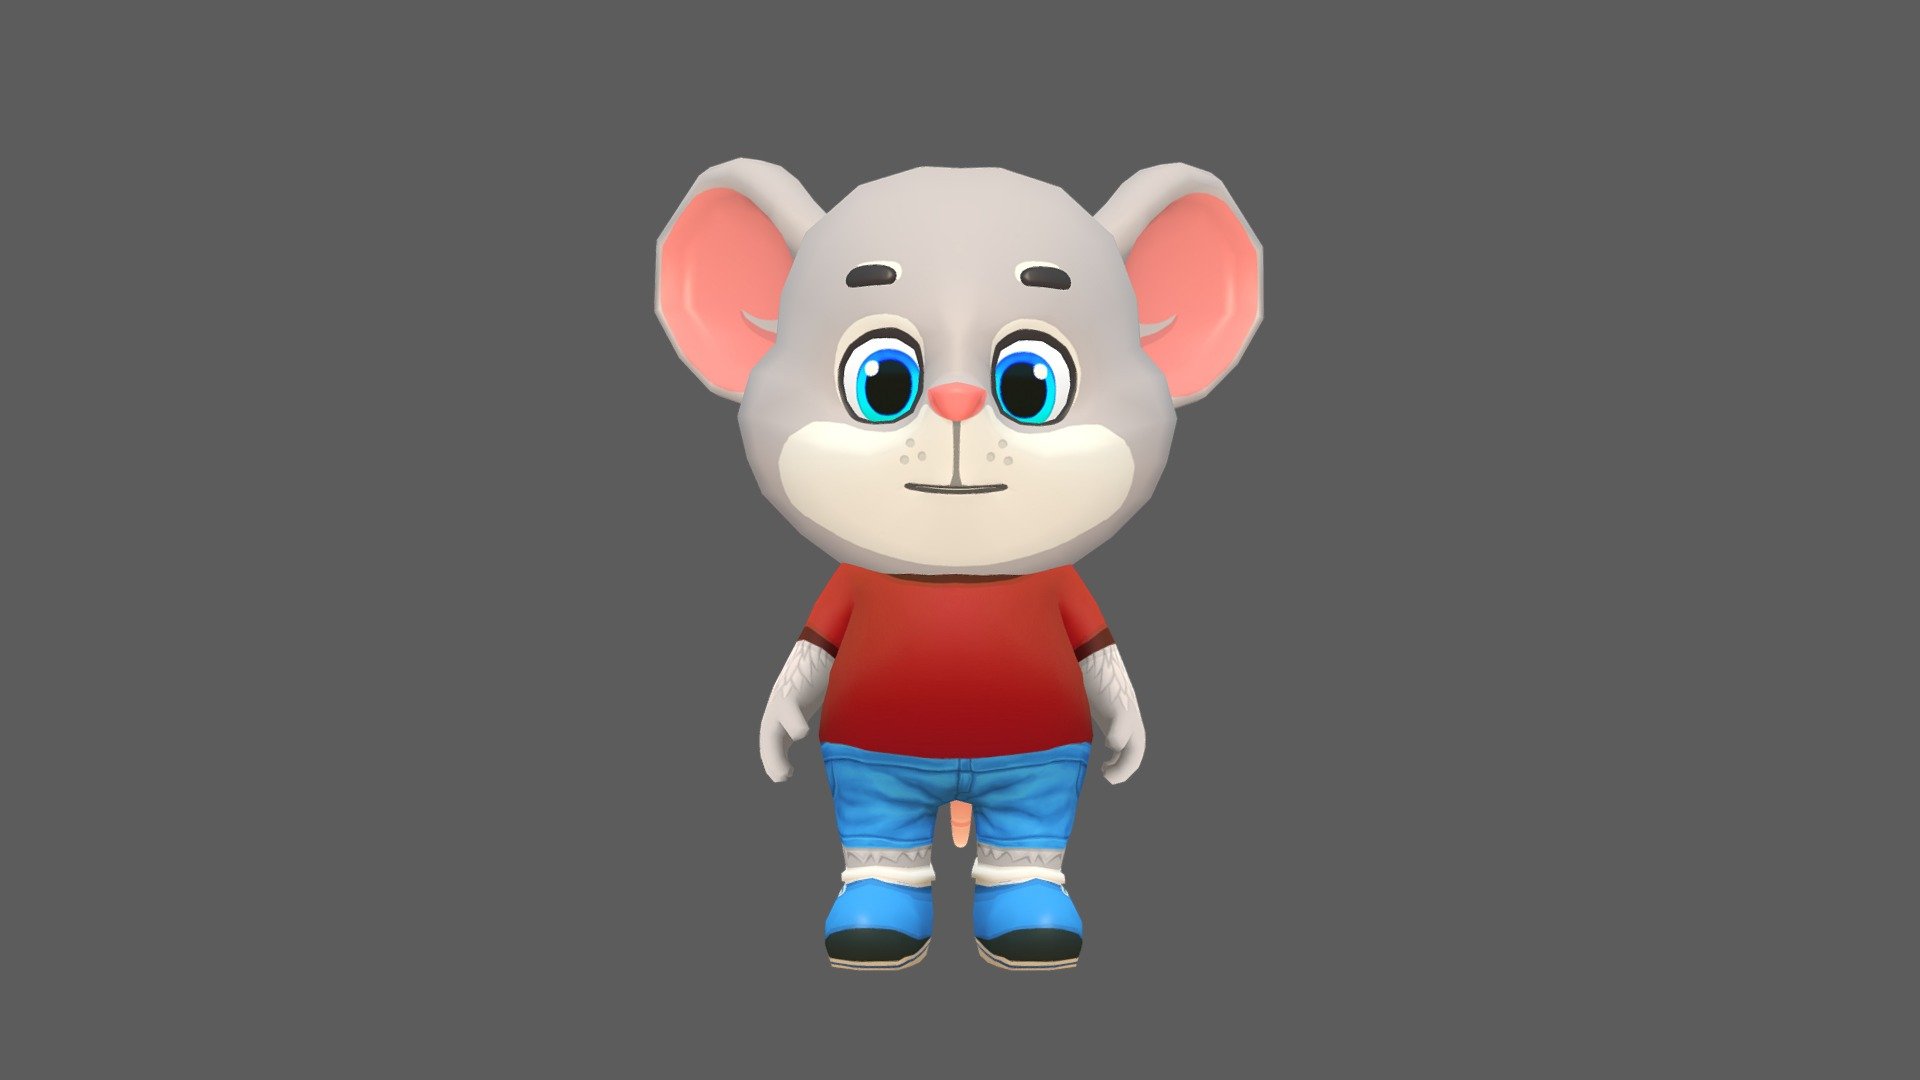 Mouse Rat Rodent character for games and animations. The model is game ready and compatible with game engines.

Included Files:


Maya (.ma, .mb) - 2015 - 2020
FBX - 2014 - 2020
OBJ

Supports Humanoid Animation:


Unity Humanoid compatible.
Mixamo and other humanoid animation libraries (MoCap).
Removable Tail.

Full Facial and Body Rig for further animation.

The model is lowpoly with four texture resolutions 4096x4096, 2048x2048, 1024x1024 &amp; 512x512.

The package includes 18 Animations:


Run
Idle
Jump
Leap left
Leap right
Skidding
Roll
Crash &amp; Death
Power up
Whirl
Whirl jump
Waving in air
Backwards run
Dizzy
Gum Bubble
Gliding
Waving
Looking behind

The model is fully rigged and can be easily animated in case further animating or modification is required.

The model is game ready at:


3696 Polygons
3679 Vertices

The model is UV mapped with non-overlapping UV's. The shadows and lights are baked in the texture 3d model